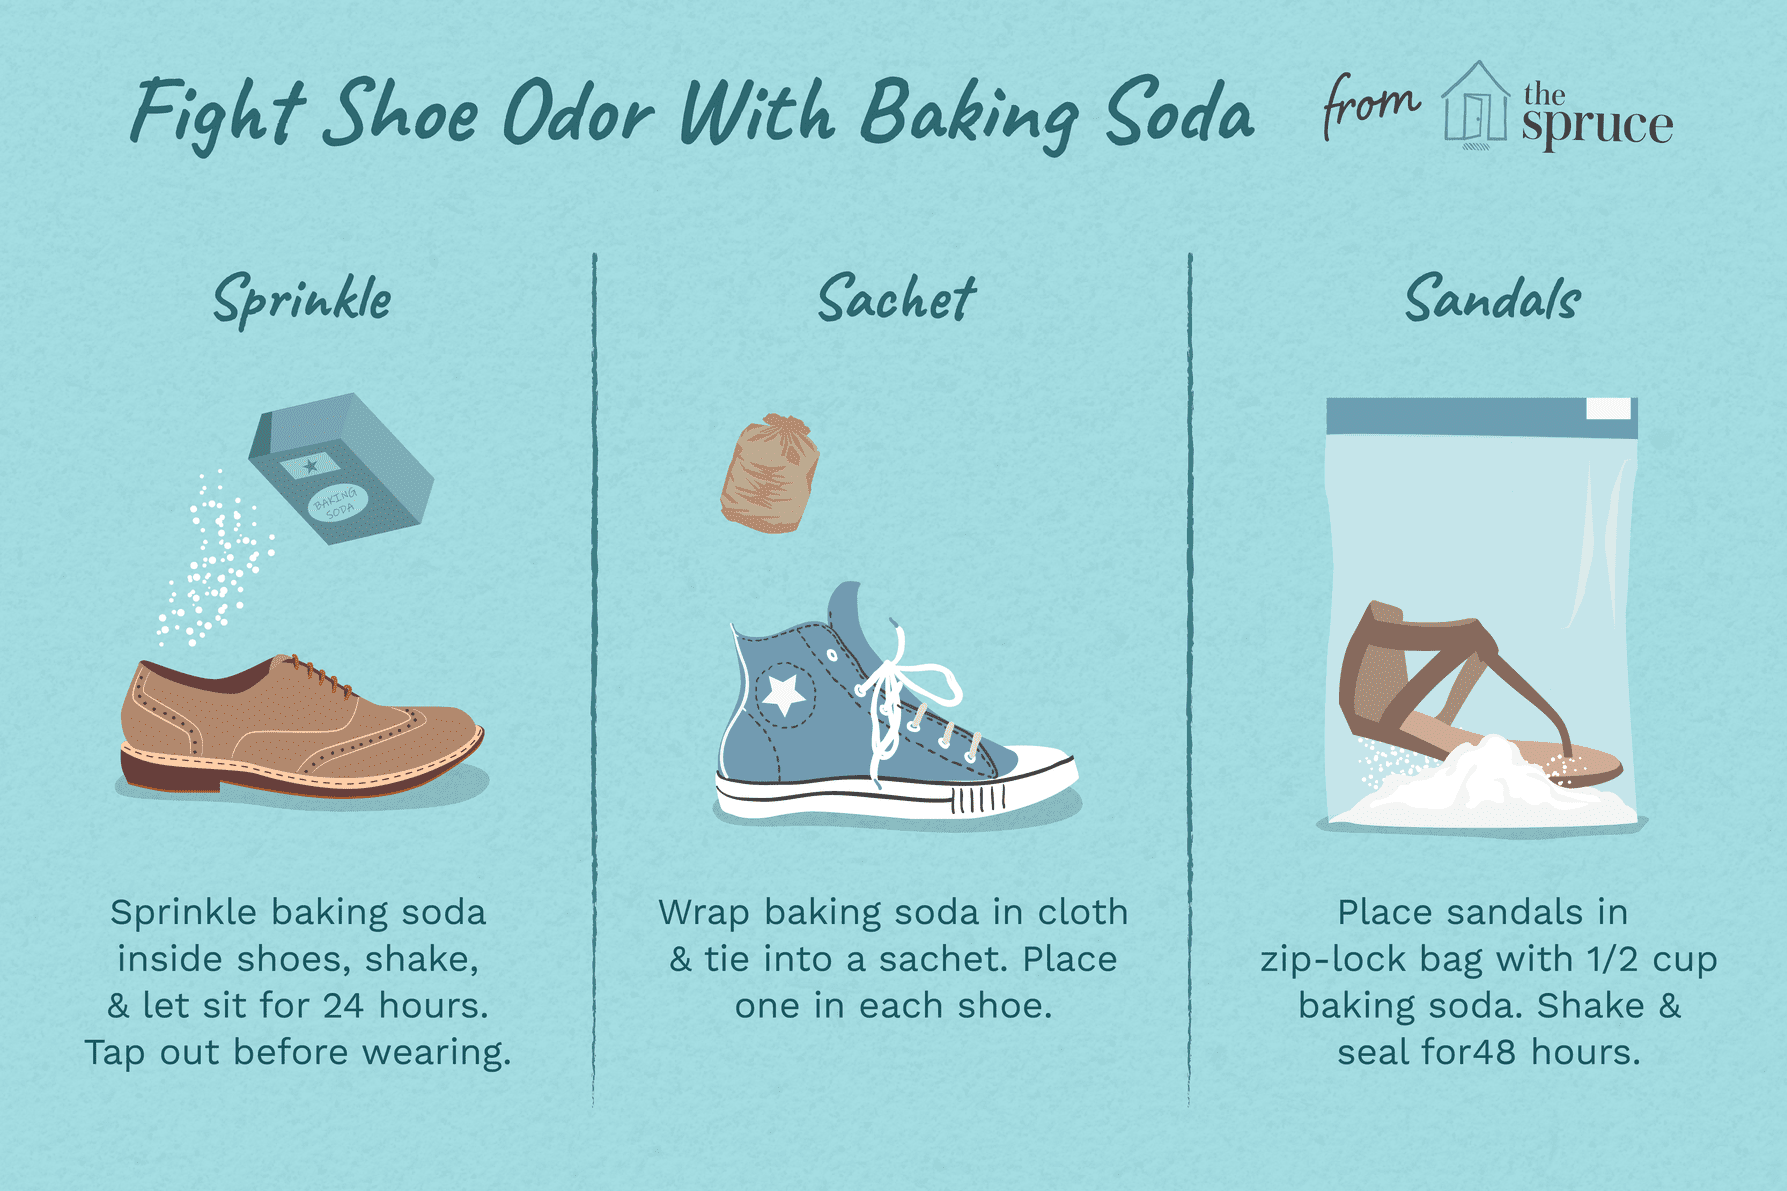 Refresh Your Smelly Shoes With Baking Soda